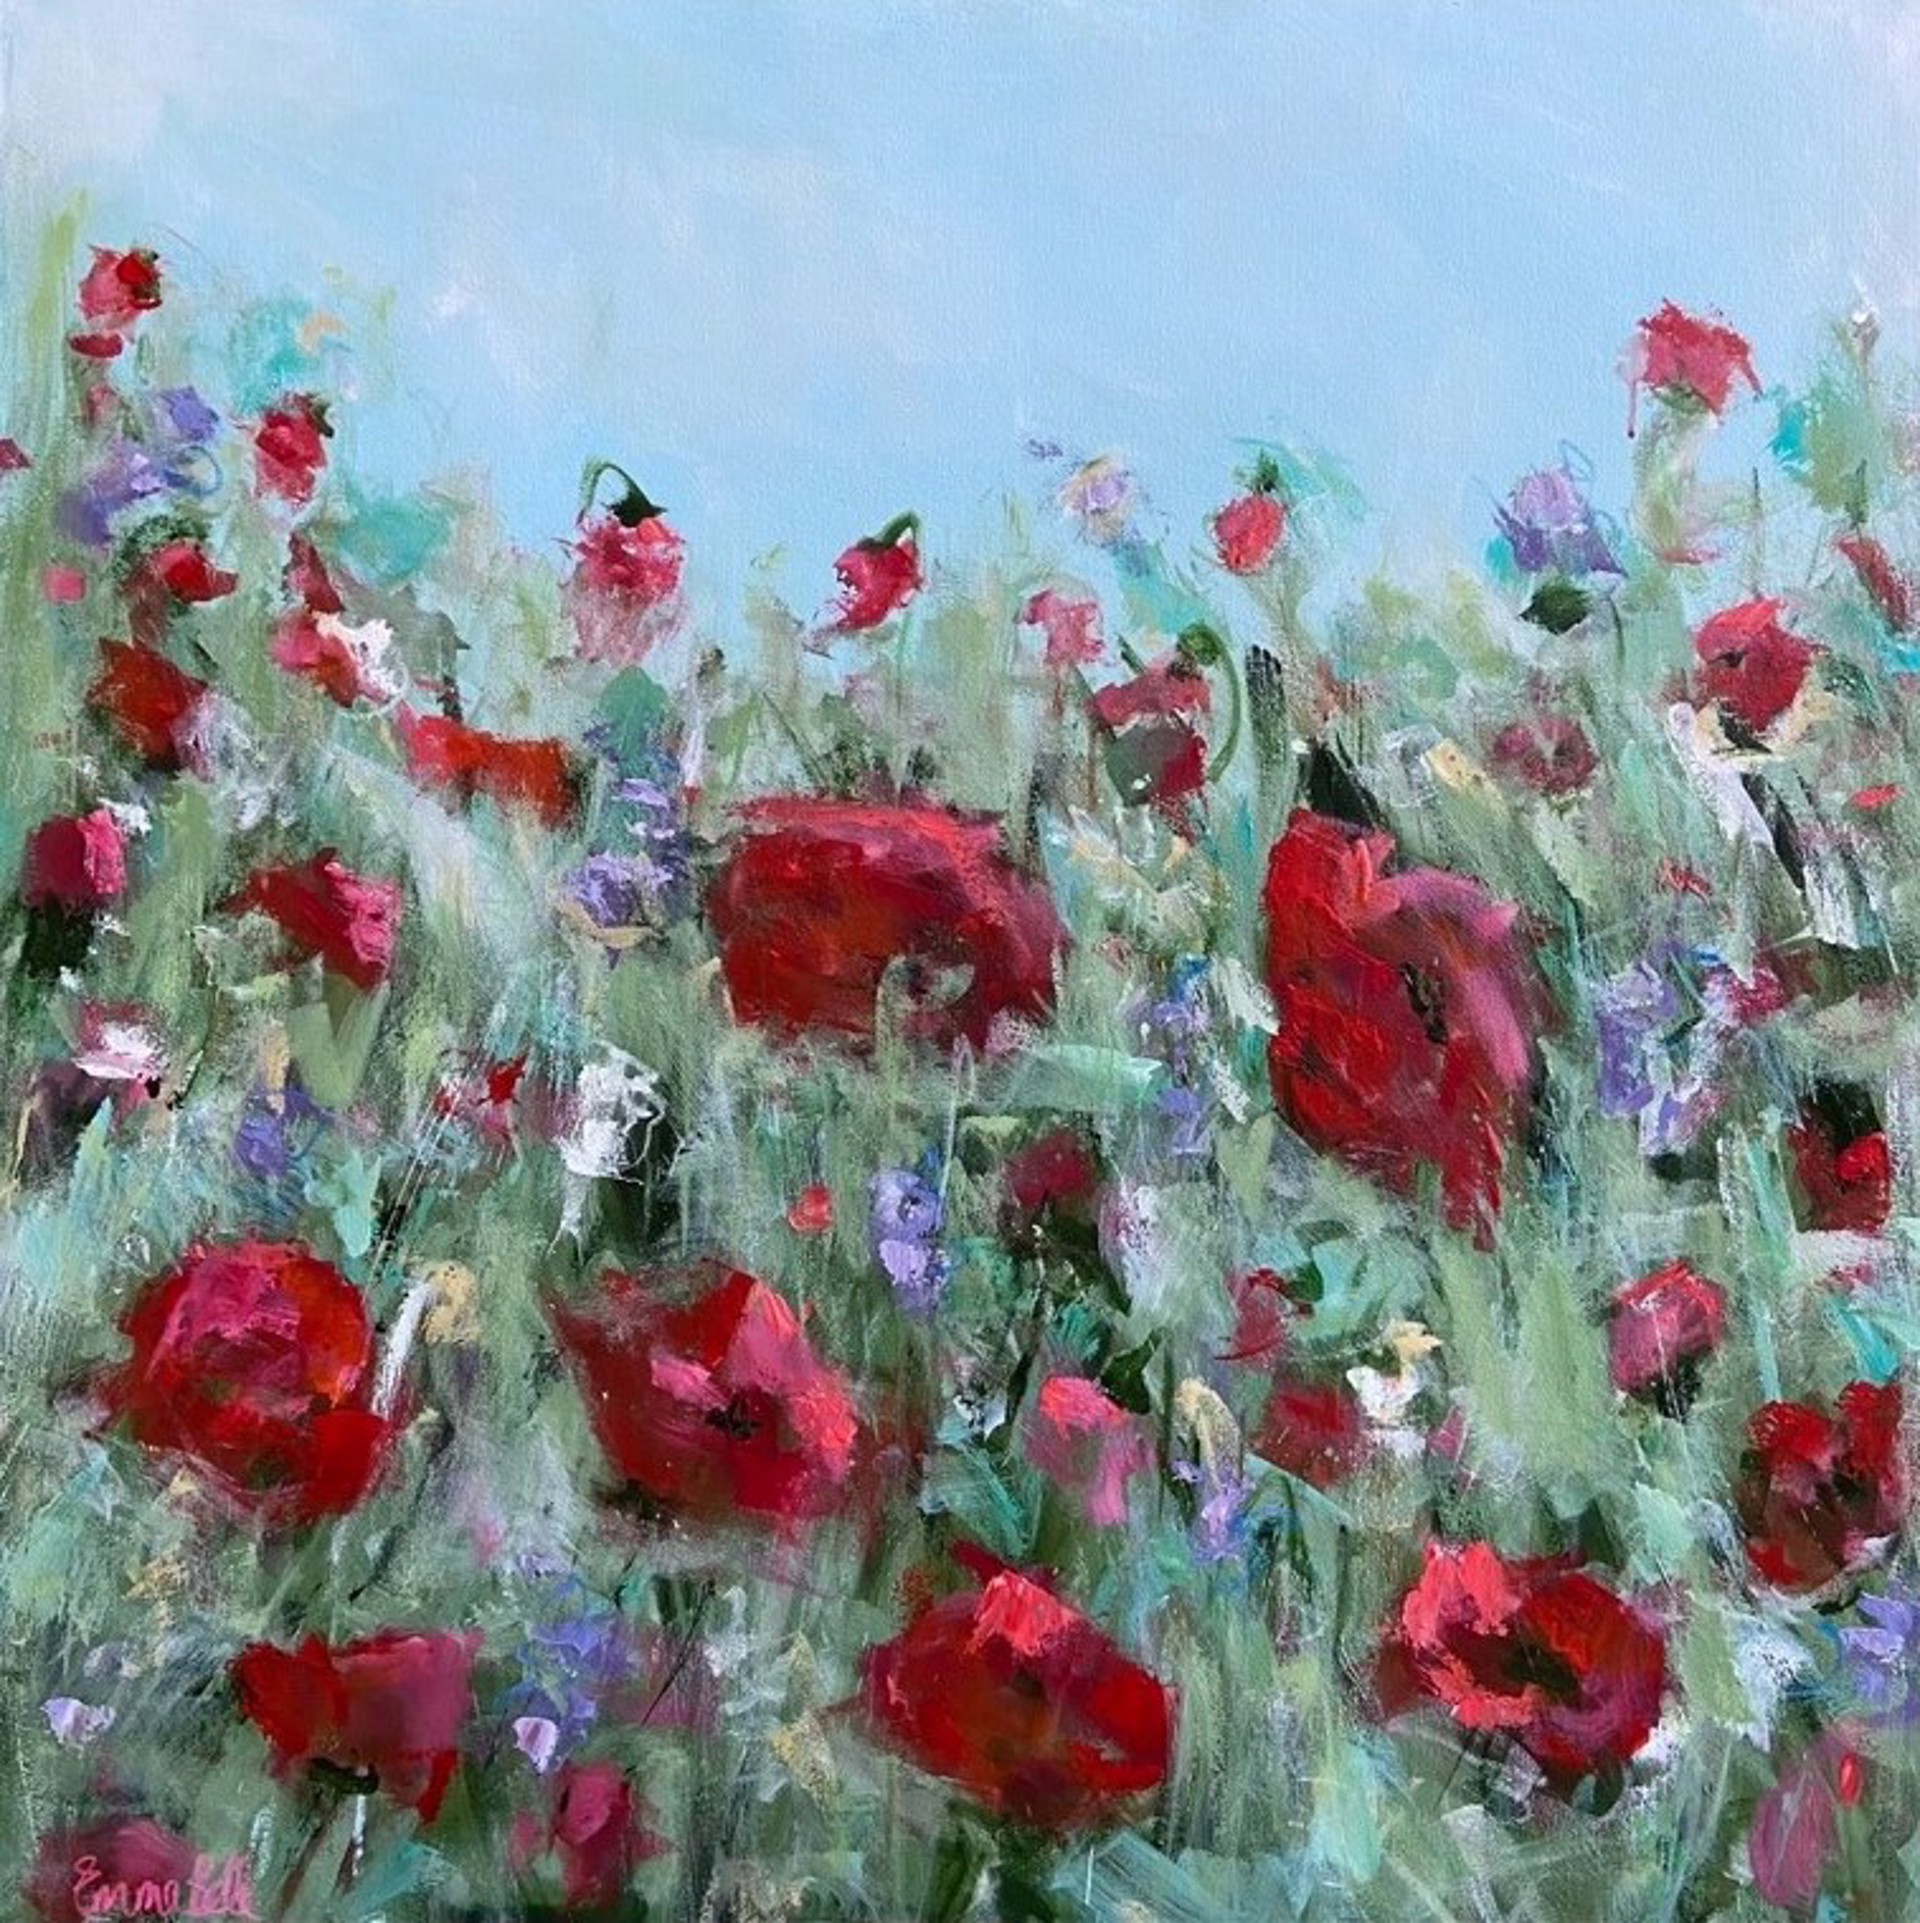 Poppies In The Breeze by Emma Bell